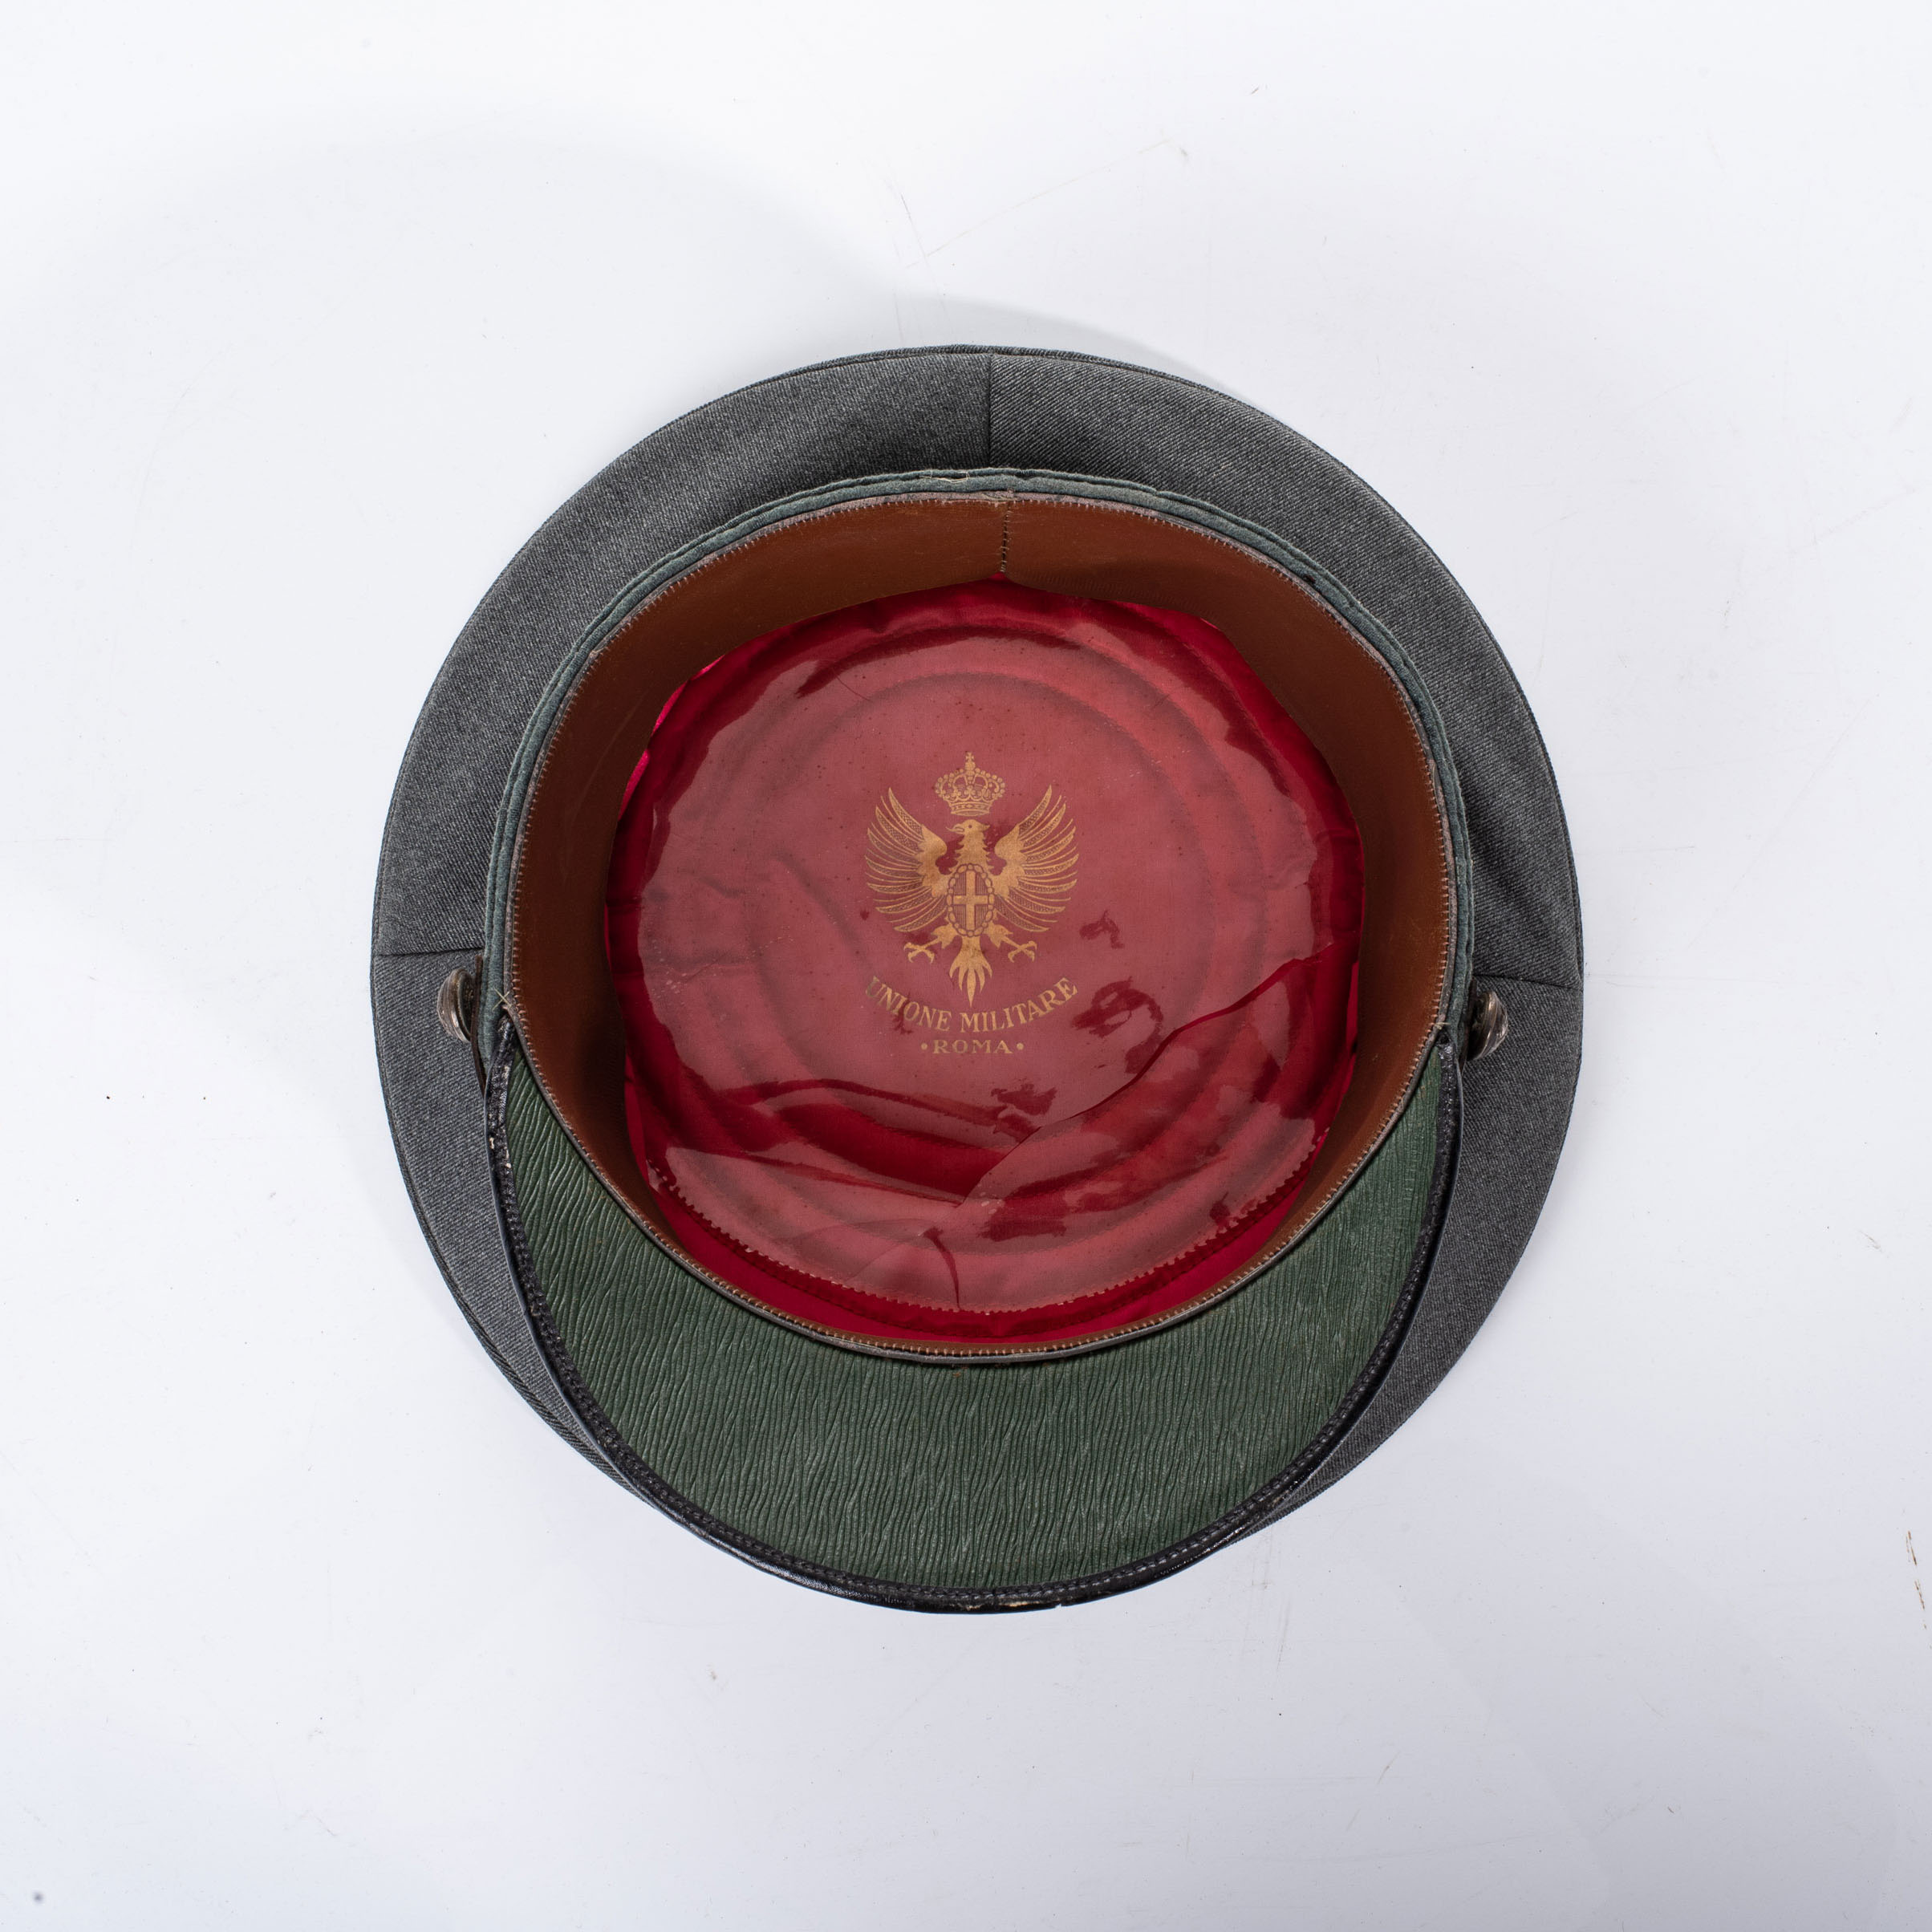 A WWII ITALIAN ARMY DIVISION GENERAL'S PEAK CAP - Image 2 of 4